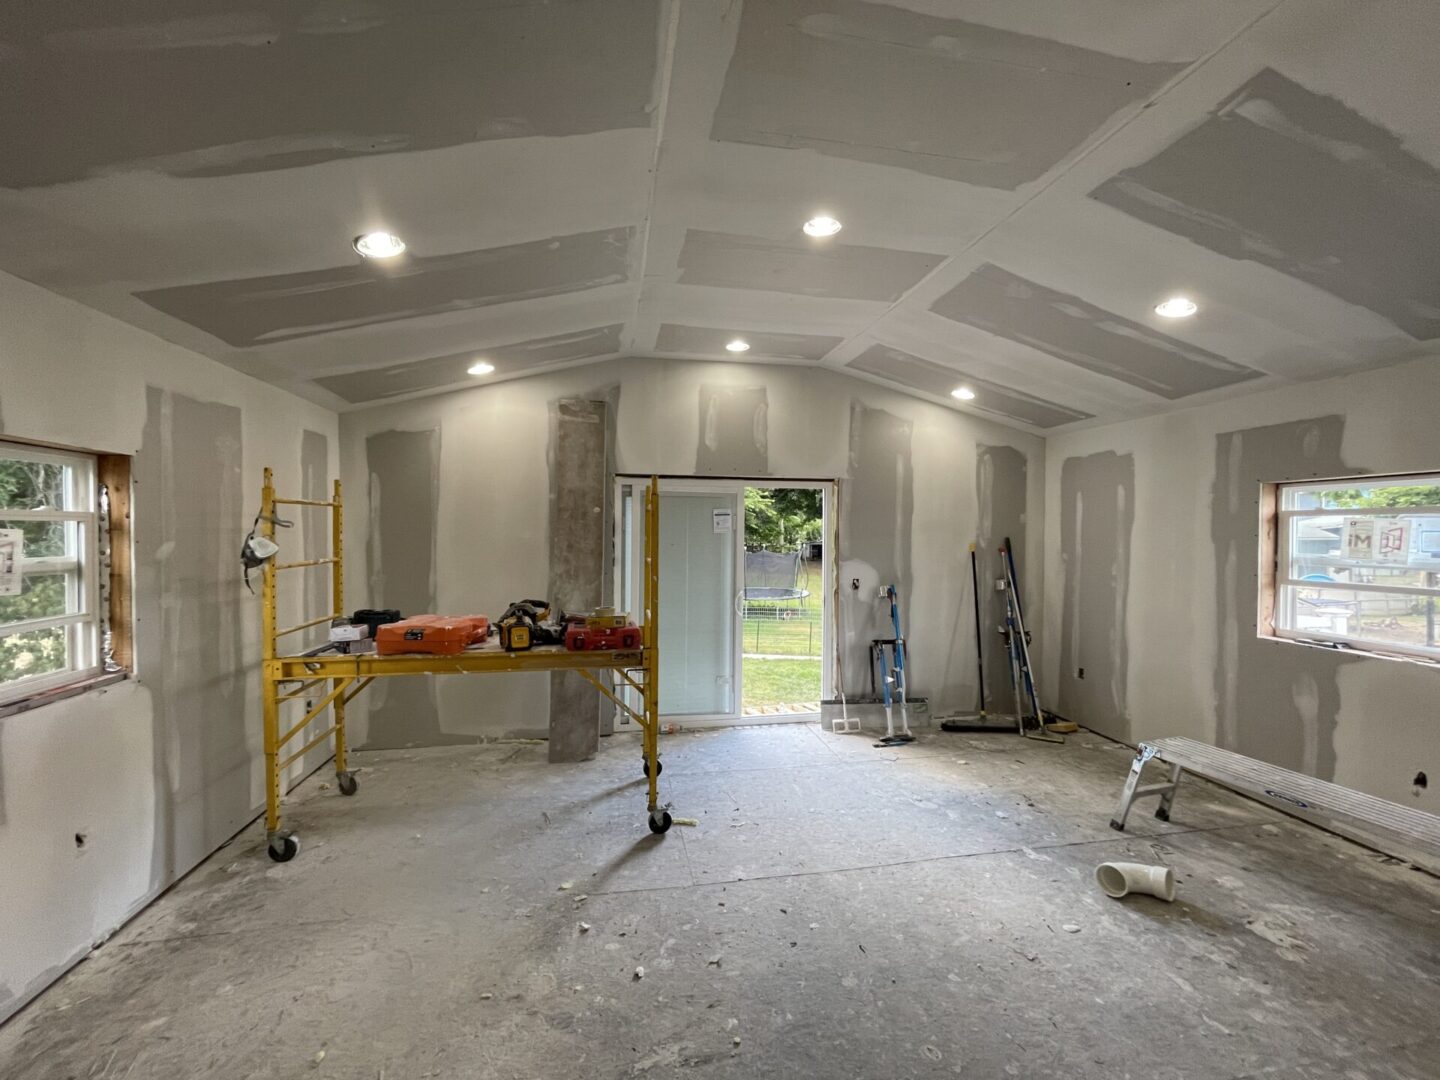 A room with walls being remodeled and the ceiling is being painted.